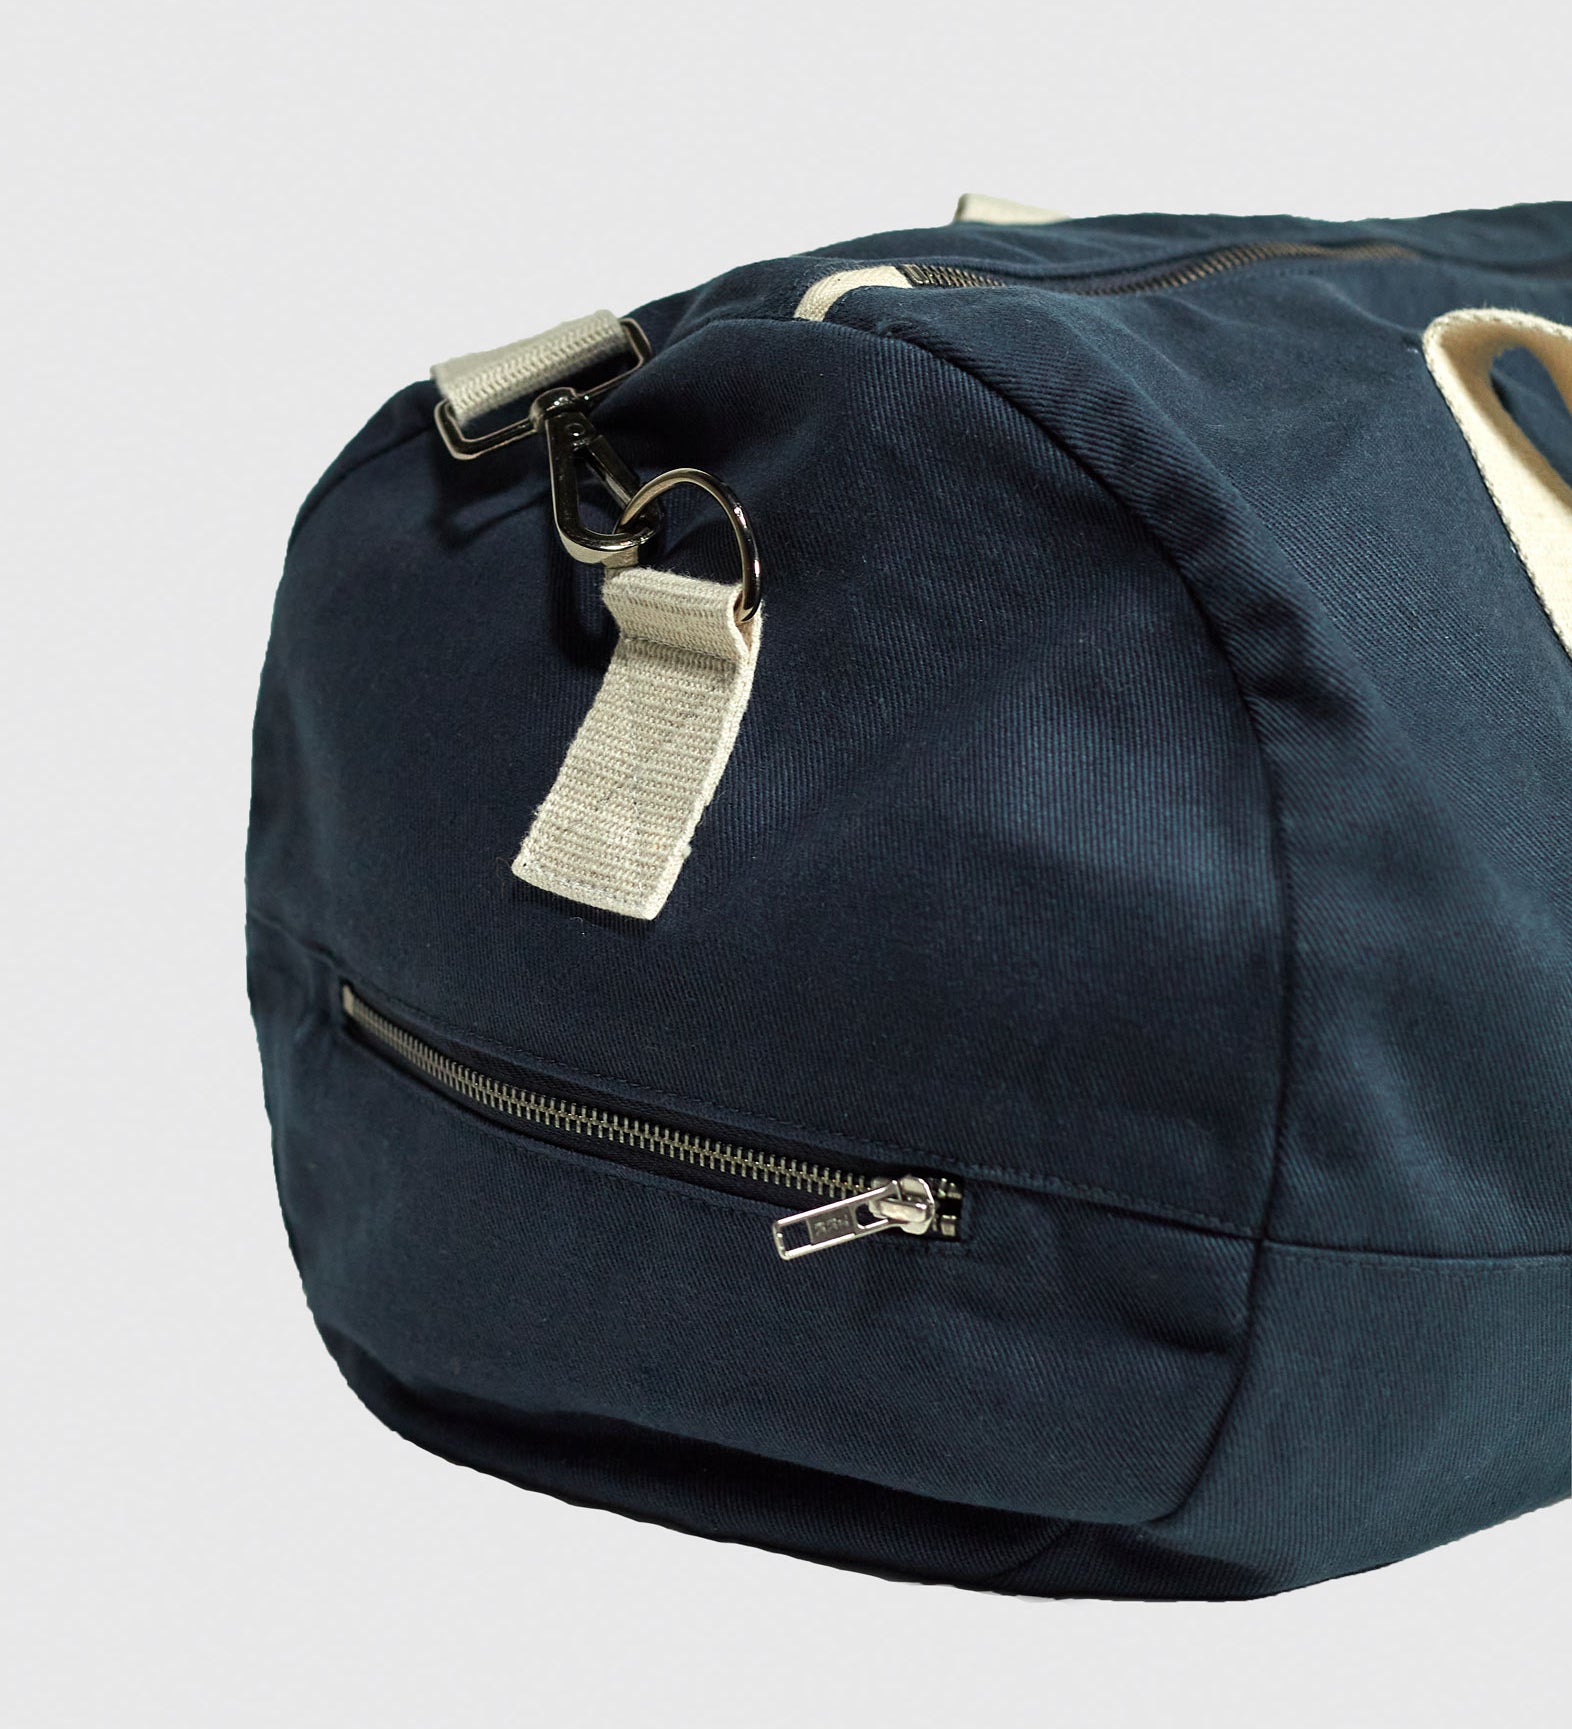 Focus on end of Uskees #0403 barrel bag in bluberry cotton drill, showing end zipper pocket and cotton webbing carry handle attachment.